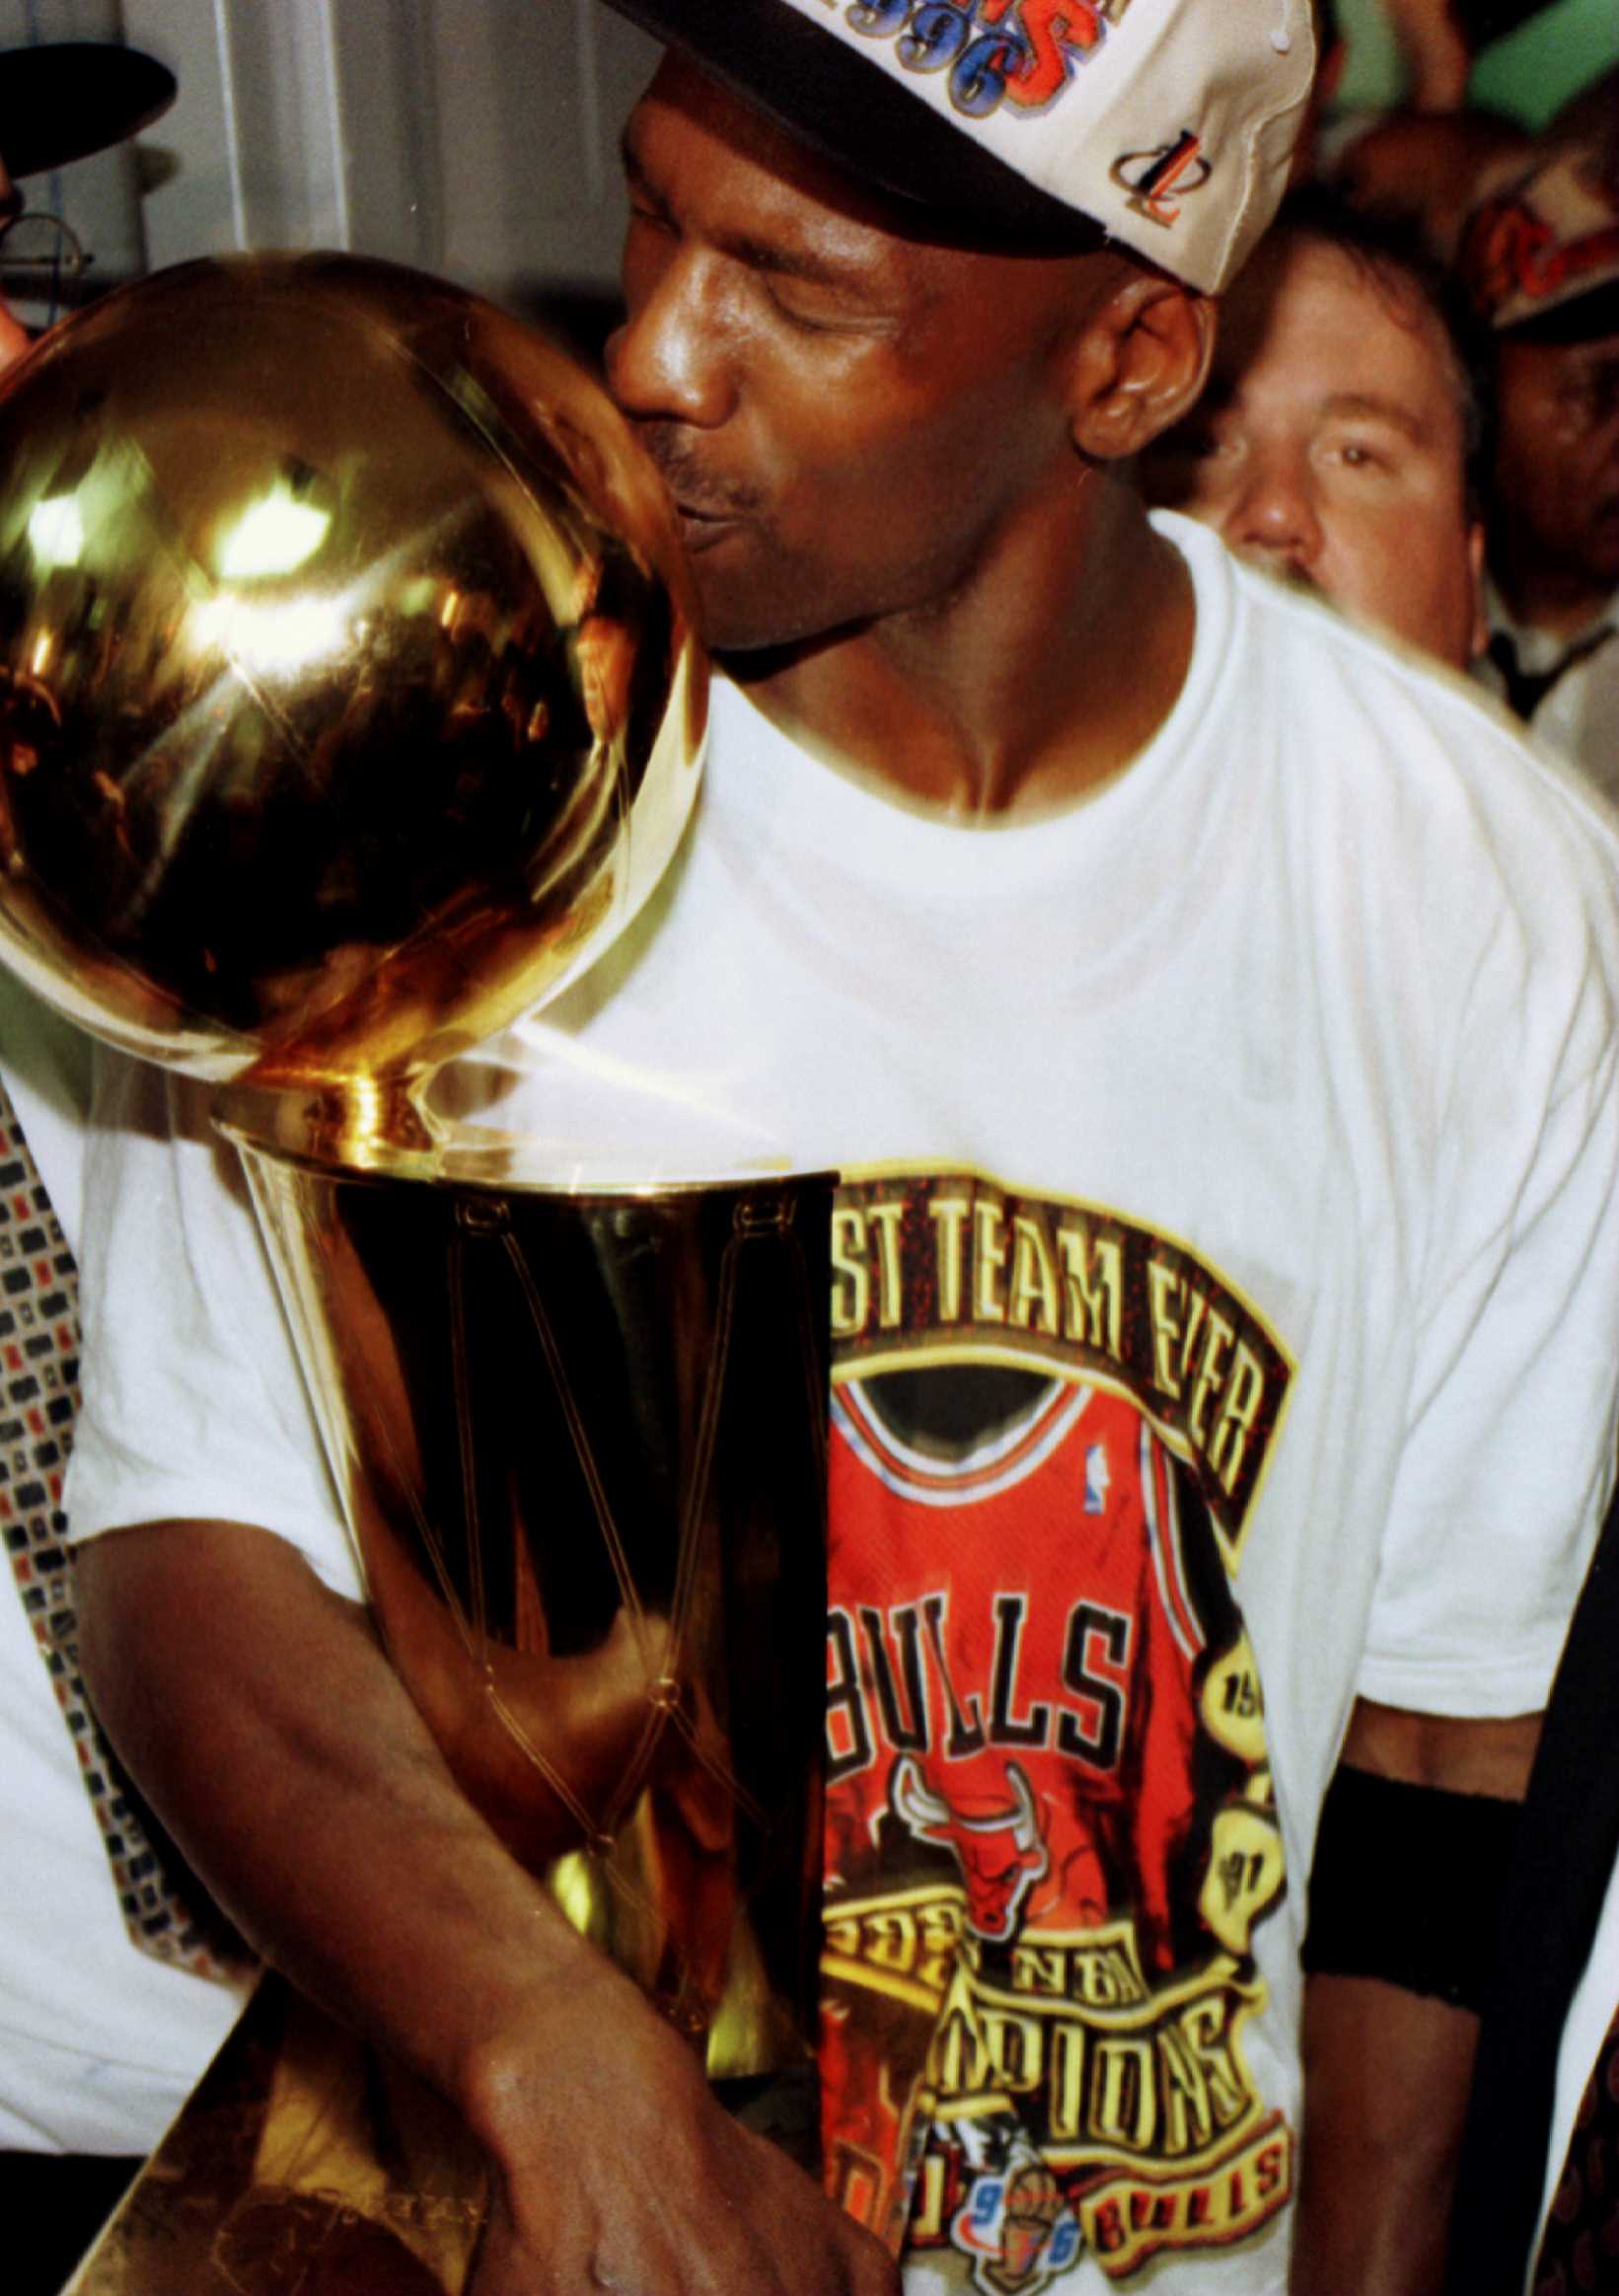 16 Jun 1996: Chicago Bull Michael Jordan kisses the NBA Championship trophy inside the Bulls Locker room at the United Center in Chicago, Illinois. The Bulls went on to defeat the Seattle Supersonics 87-75 to win the 1996 NBA Finals. This is the Bulls'' f